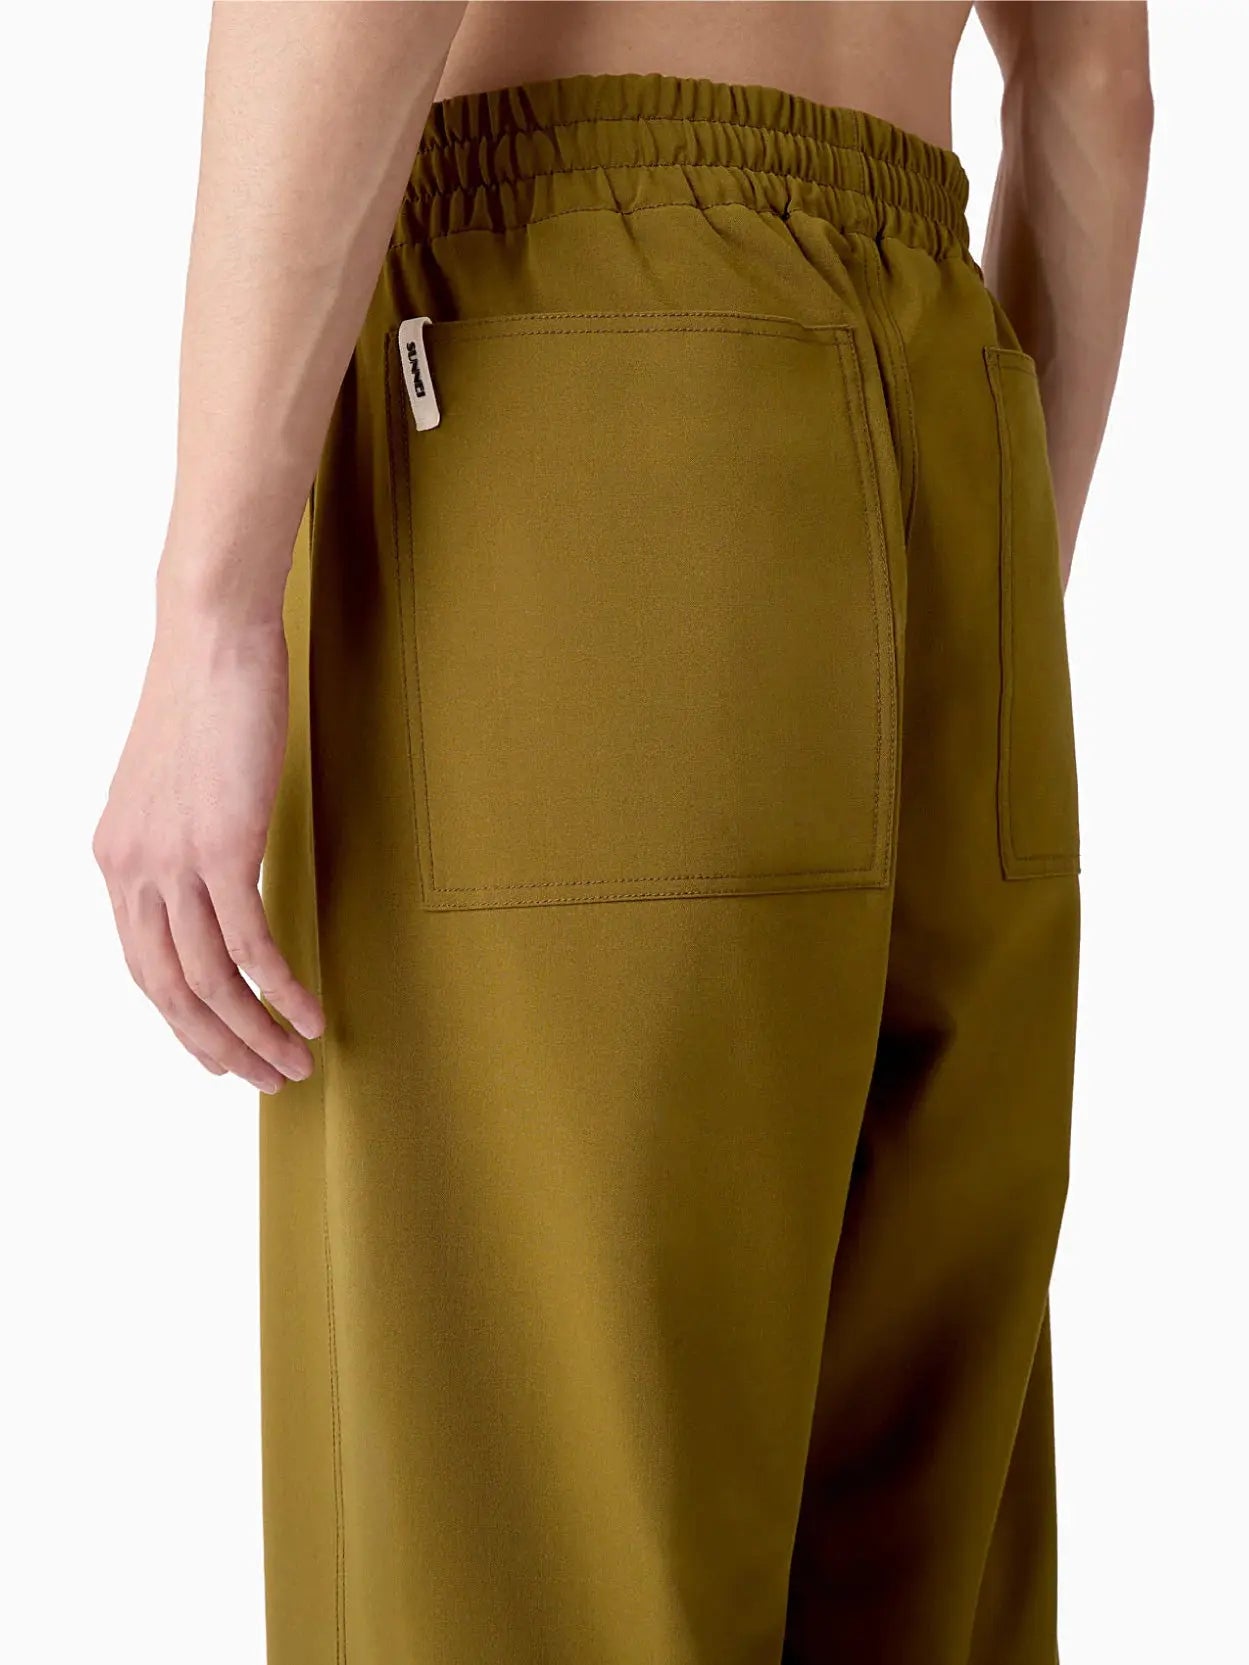 A pair of olive green, high-waisted Elastic Pants Olive Green with an elastic waistband and straight legs. The pants, available at bassalstore from the brand Sunnei, are laid flat against a plain white background.